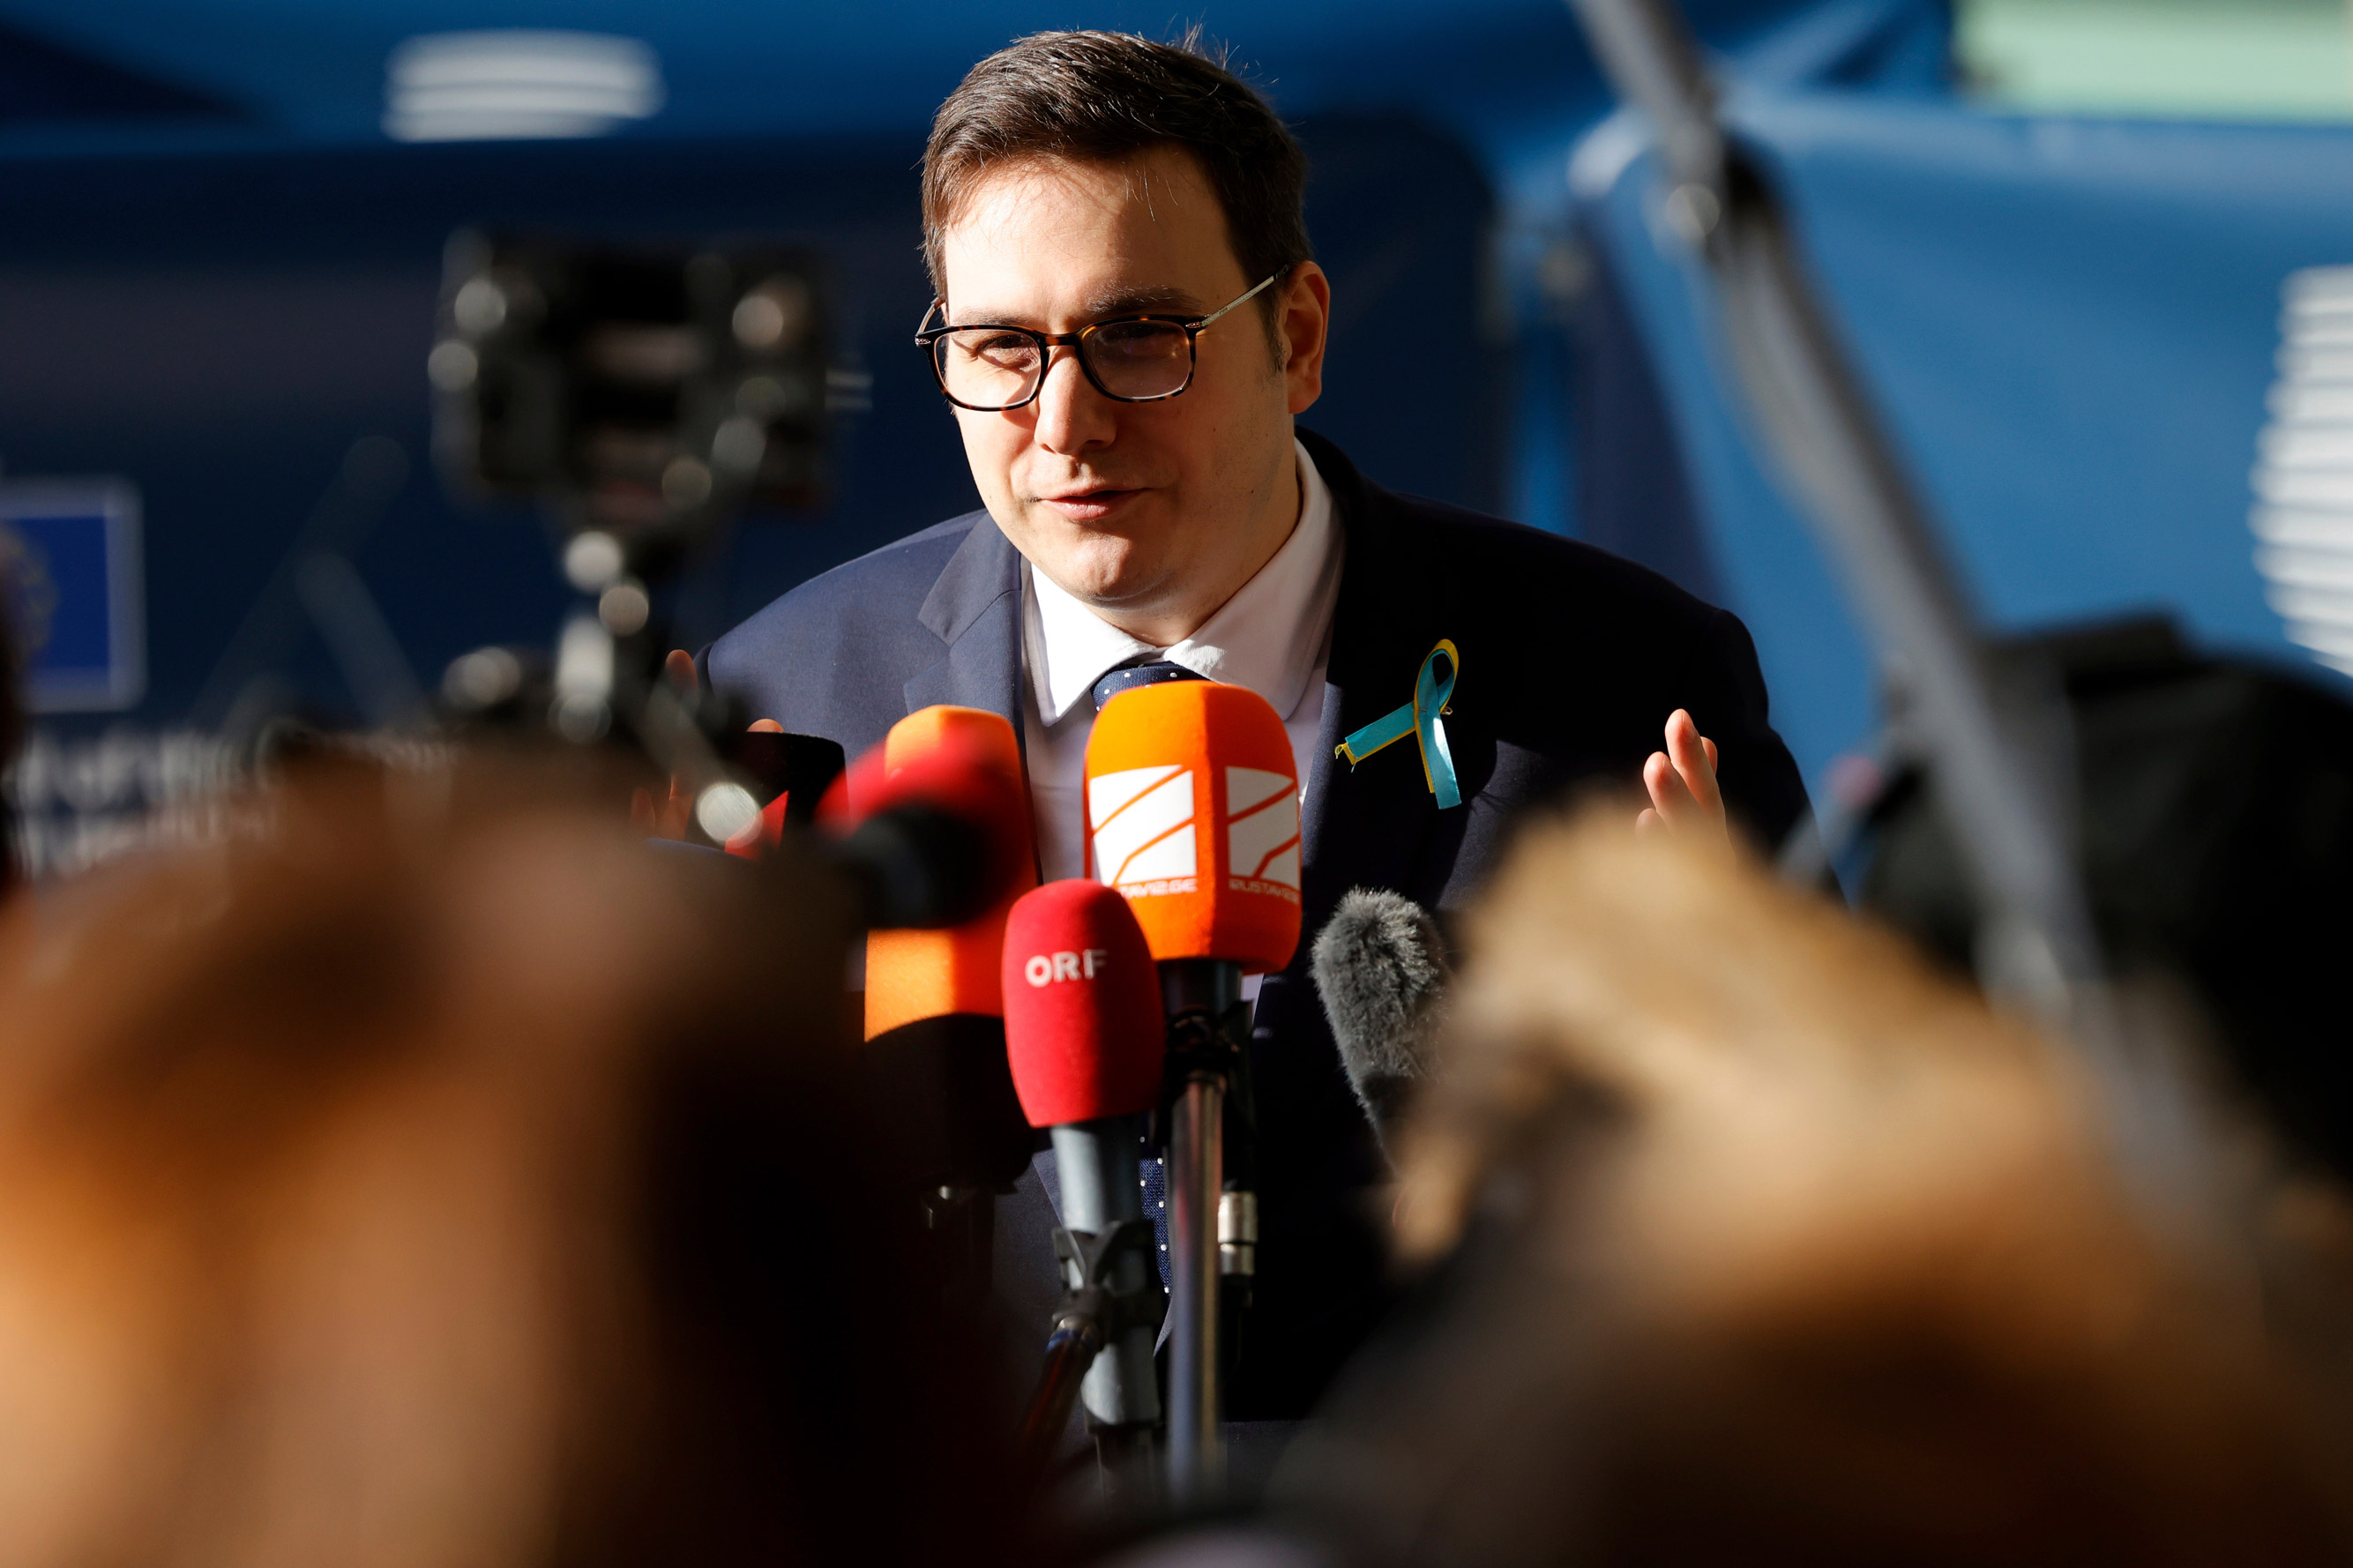 Czech Foreign Minister Jan Lipavsky speaks with the media as he arrives for a meeting of EU foreign ministers at the European Council building in Luxembourg, on April 11.